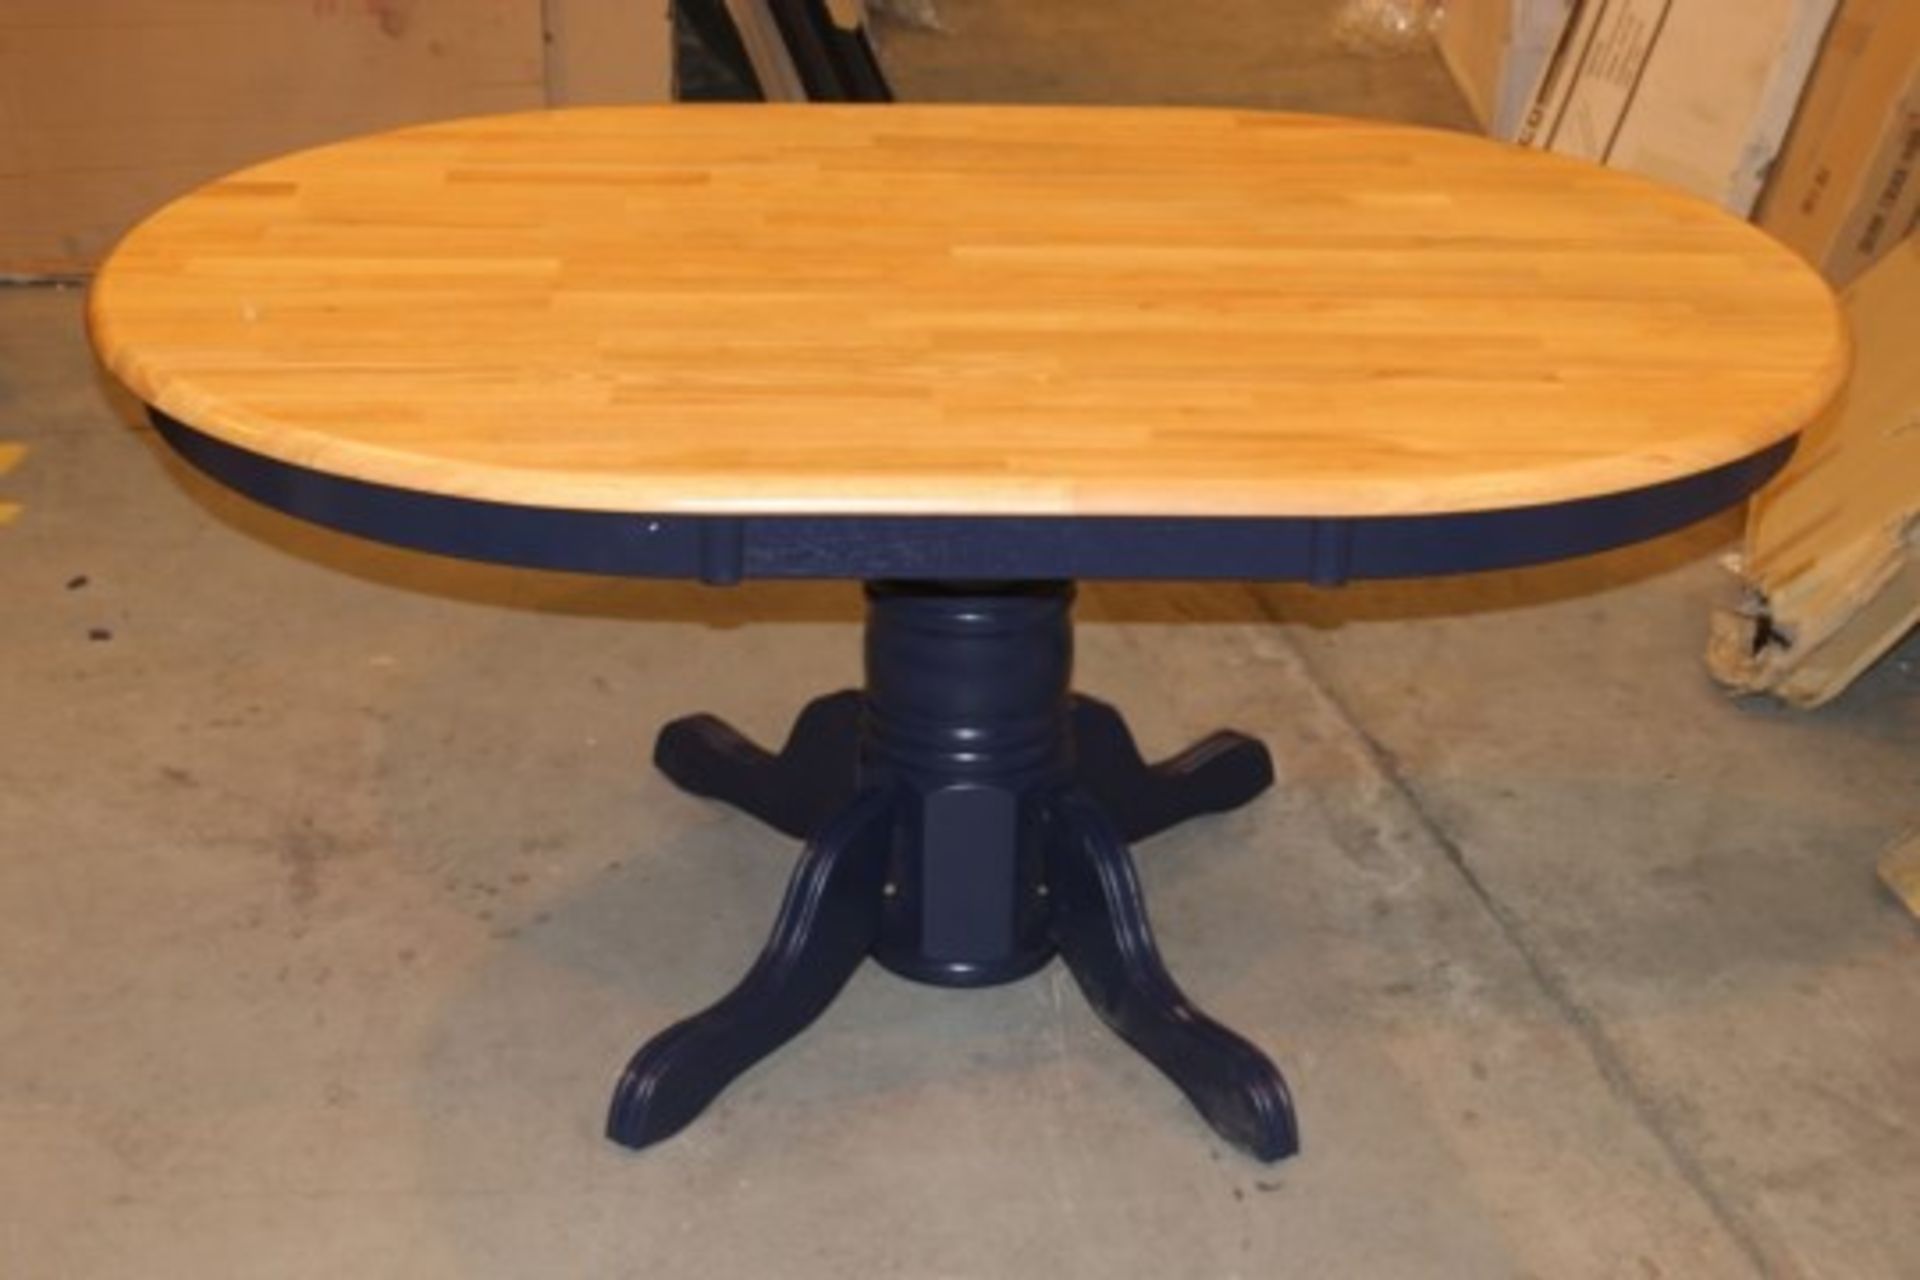 Natural & Navy Oval Pedestal Leg Designer Dining Table RRP £300 (Appraisals Available Upon